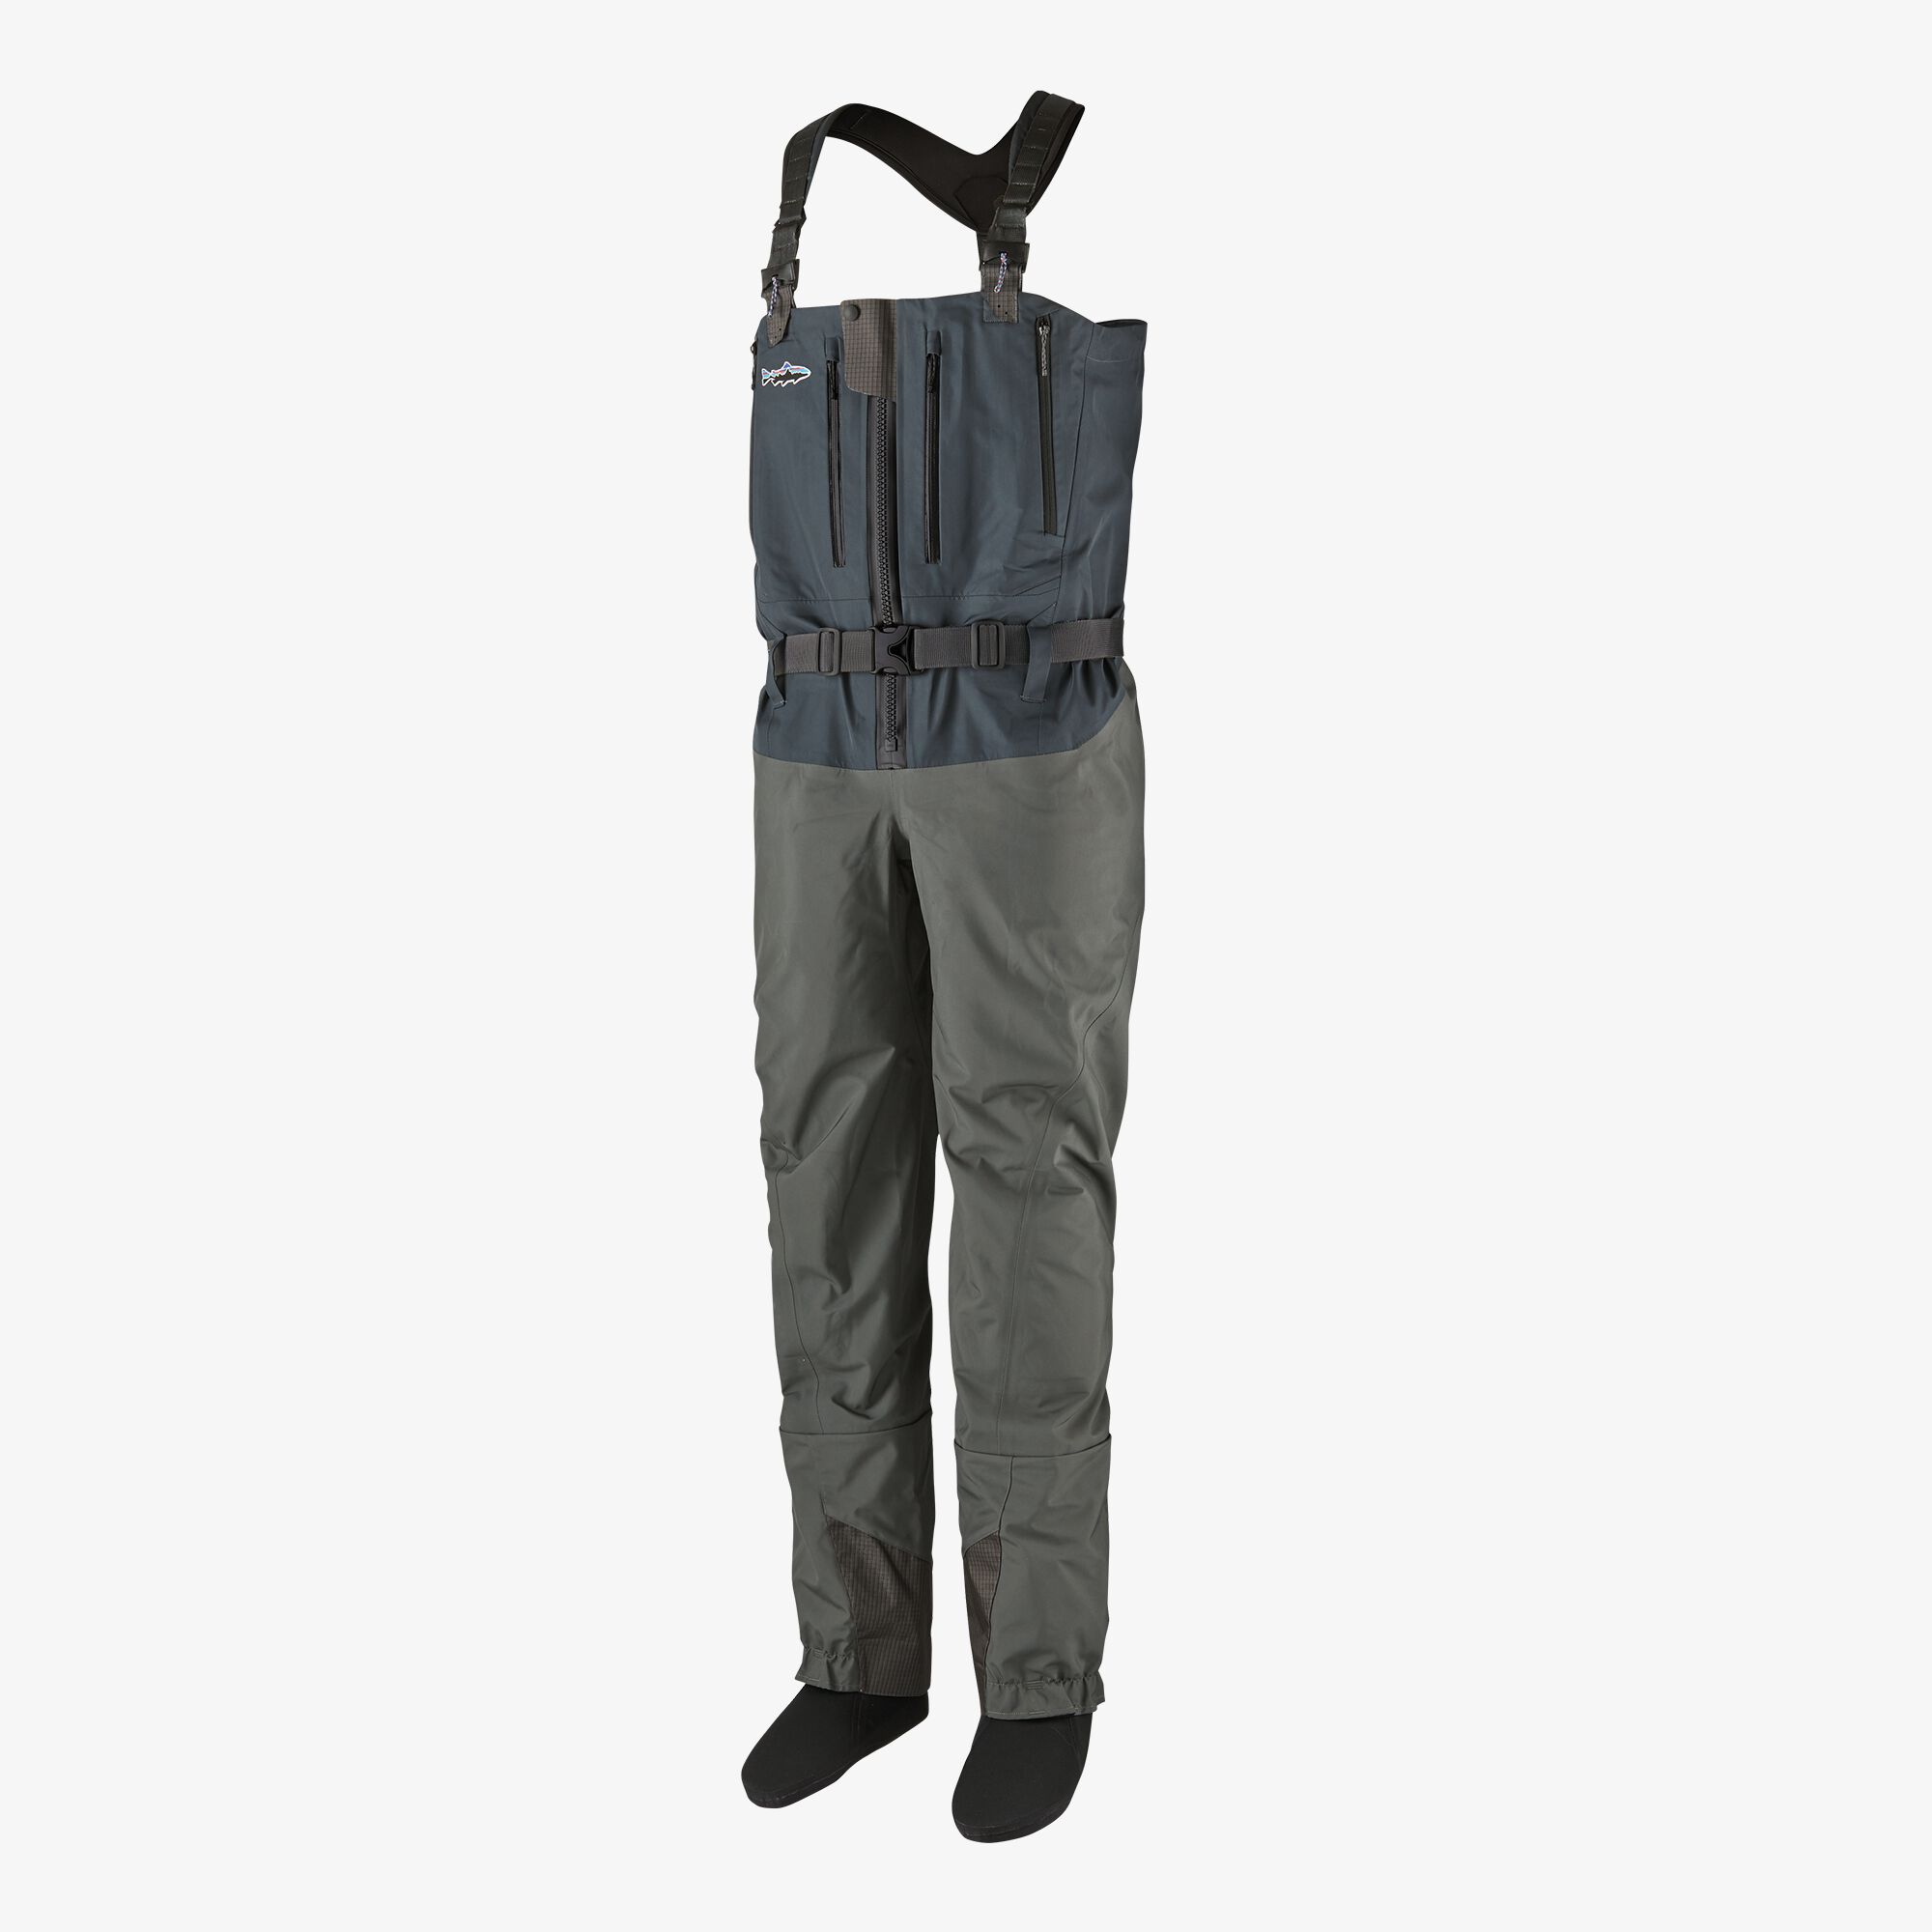 PATAGONIA SWIFTCURRENT EXPEDITION ZIP-FRONT WADER - FORGE GREY - LRM